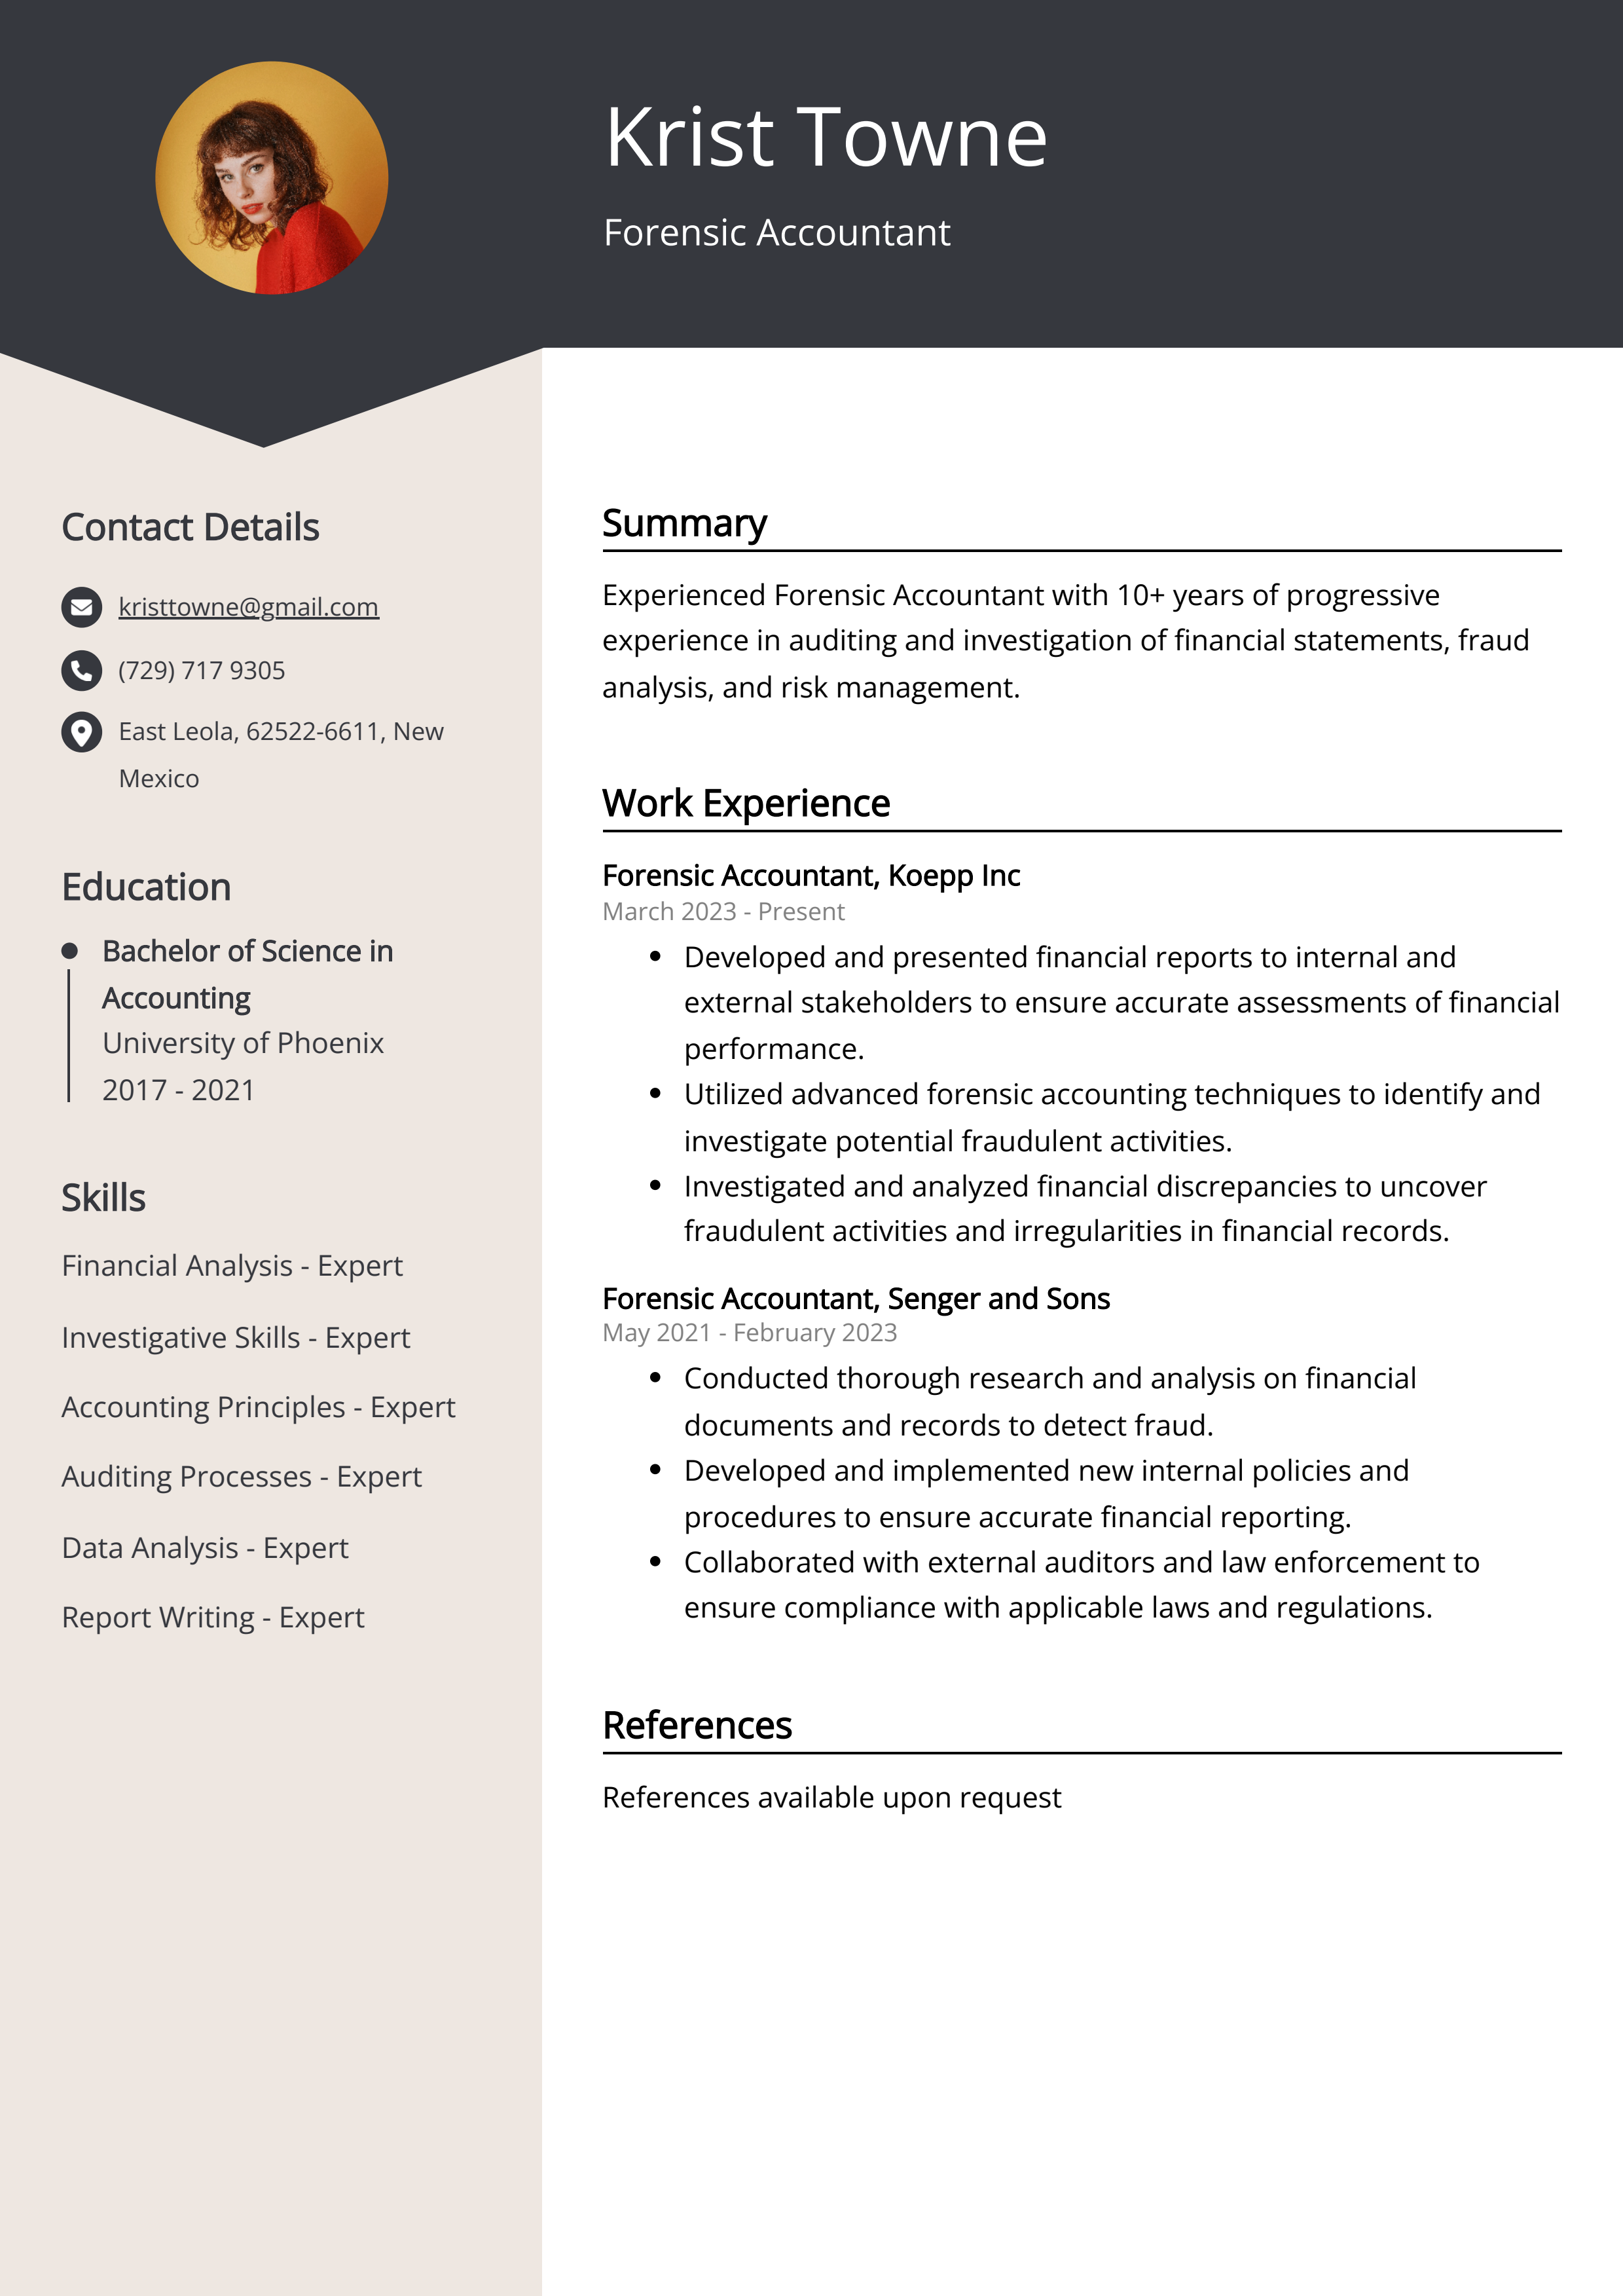 Forensic Accountant CV Example